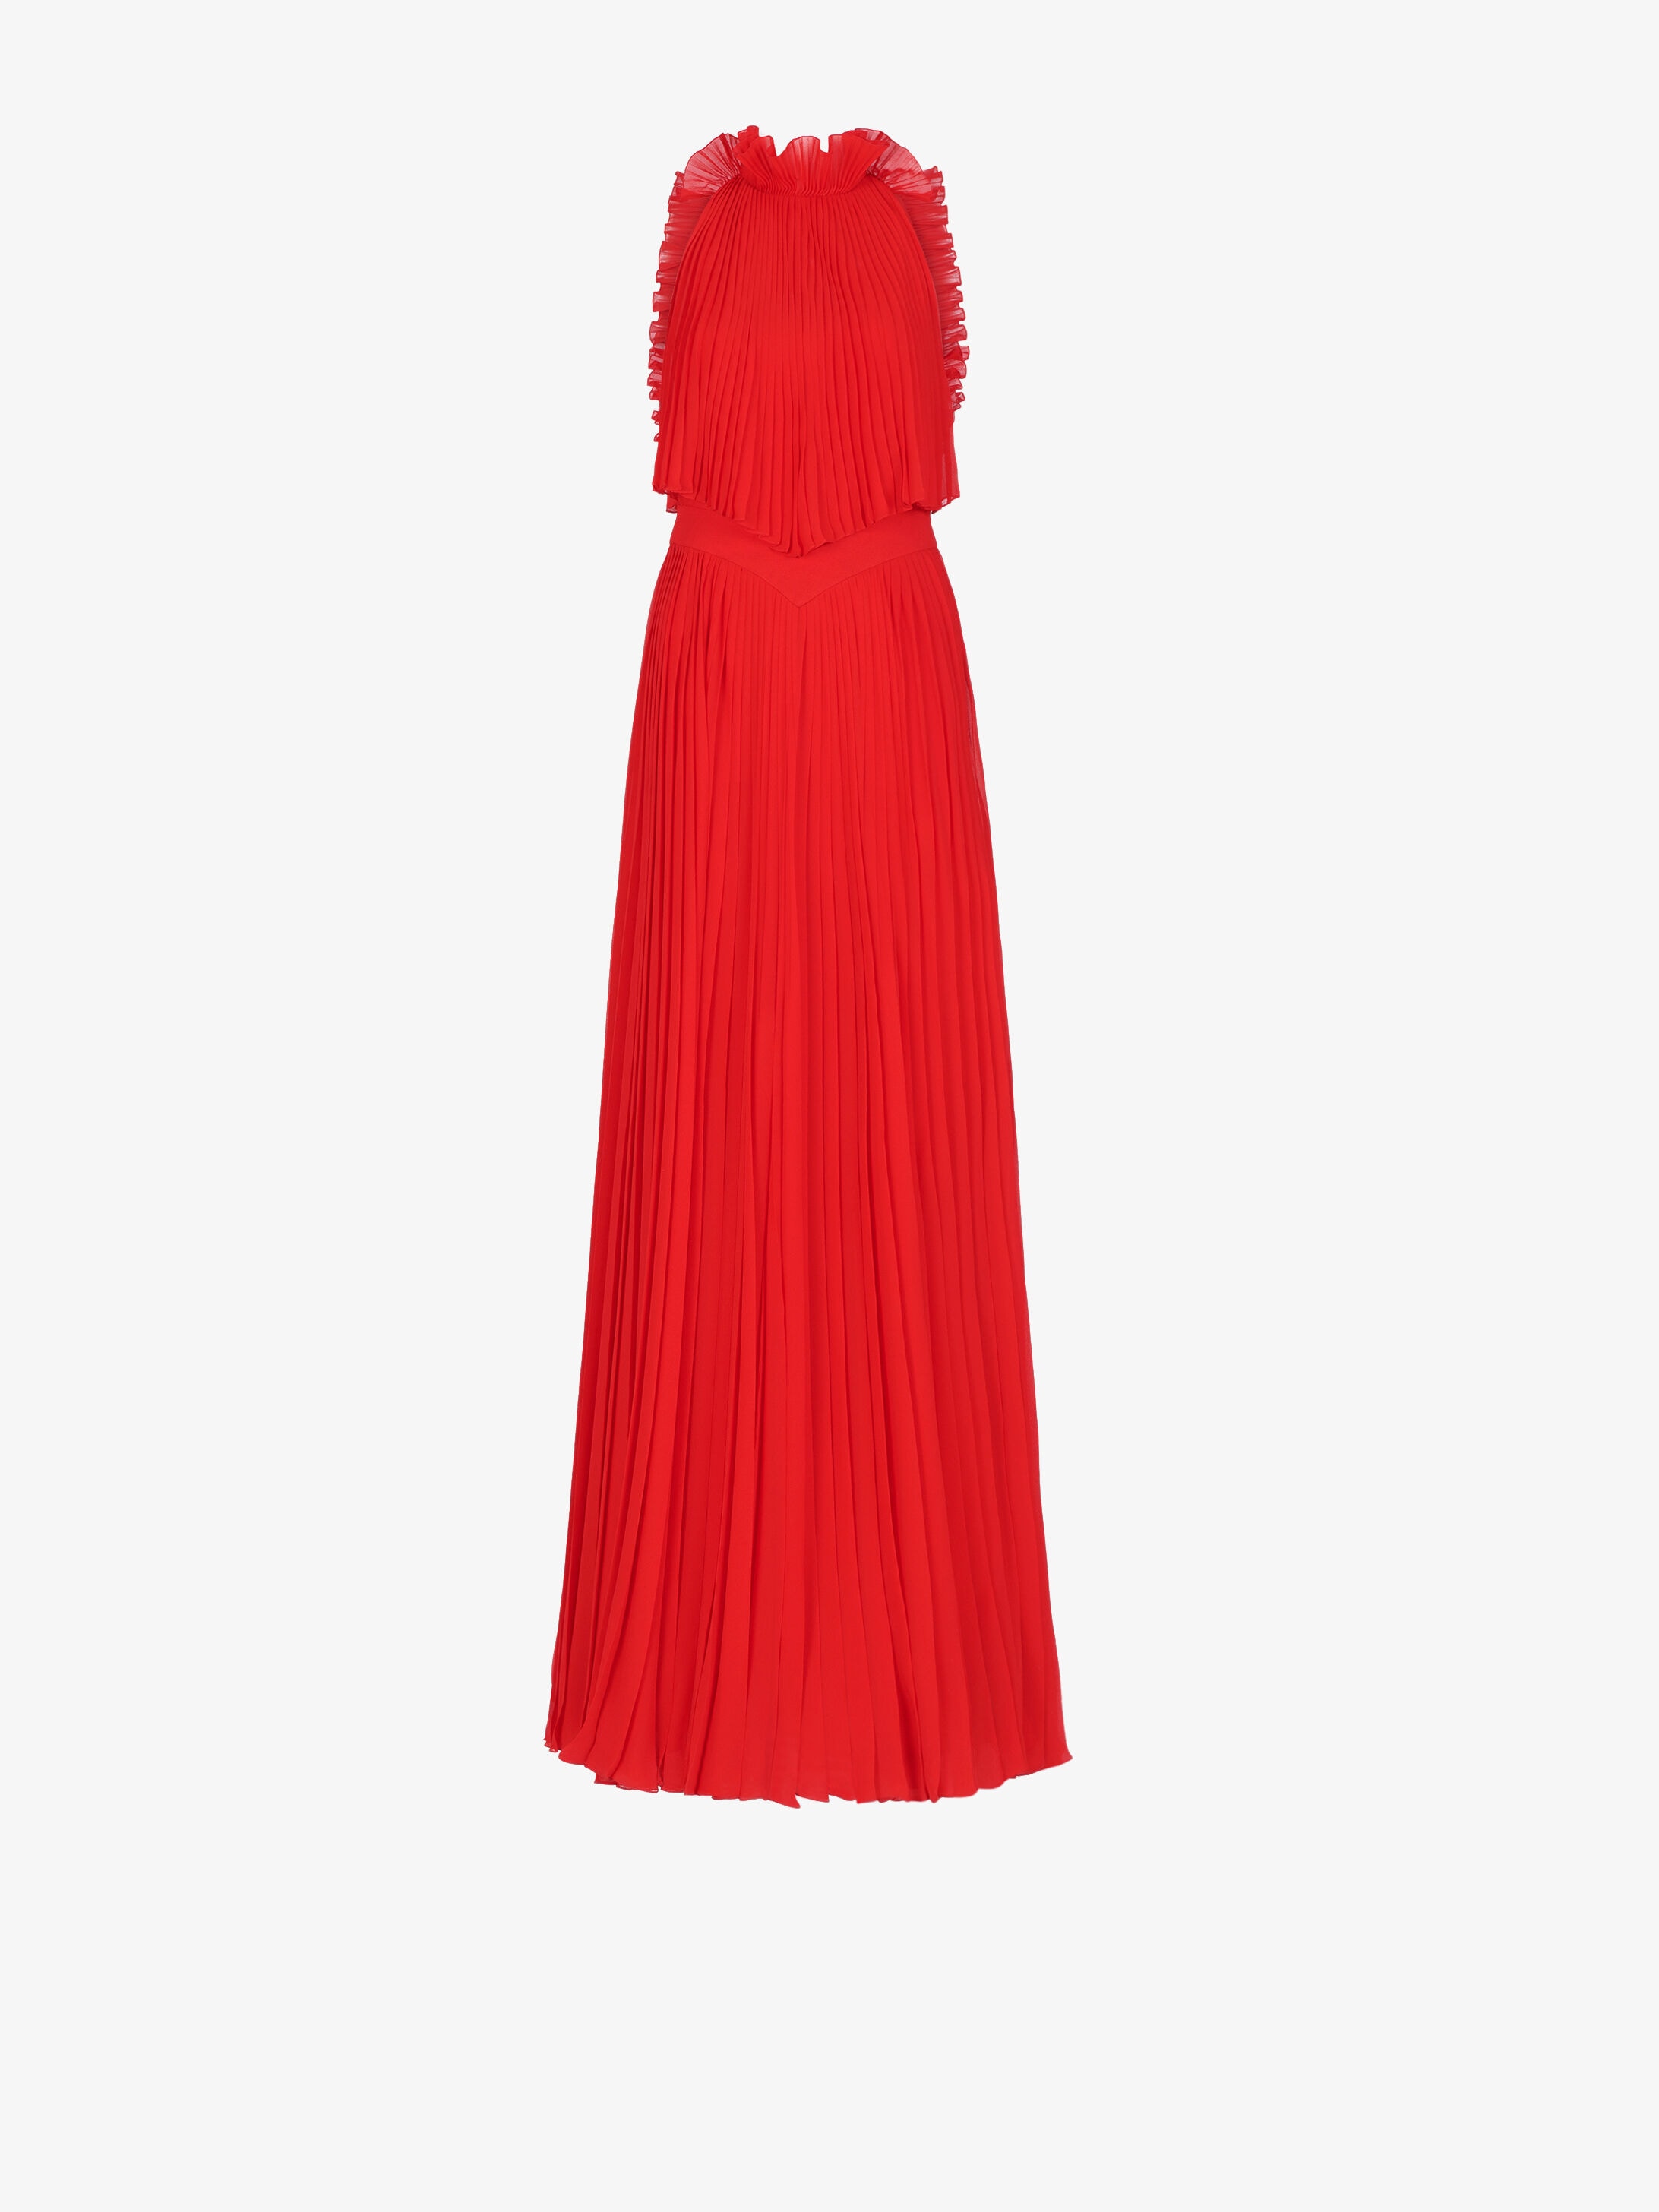 givenchy red dress